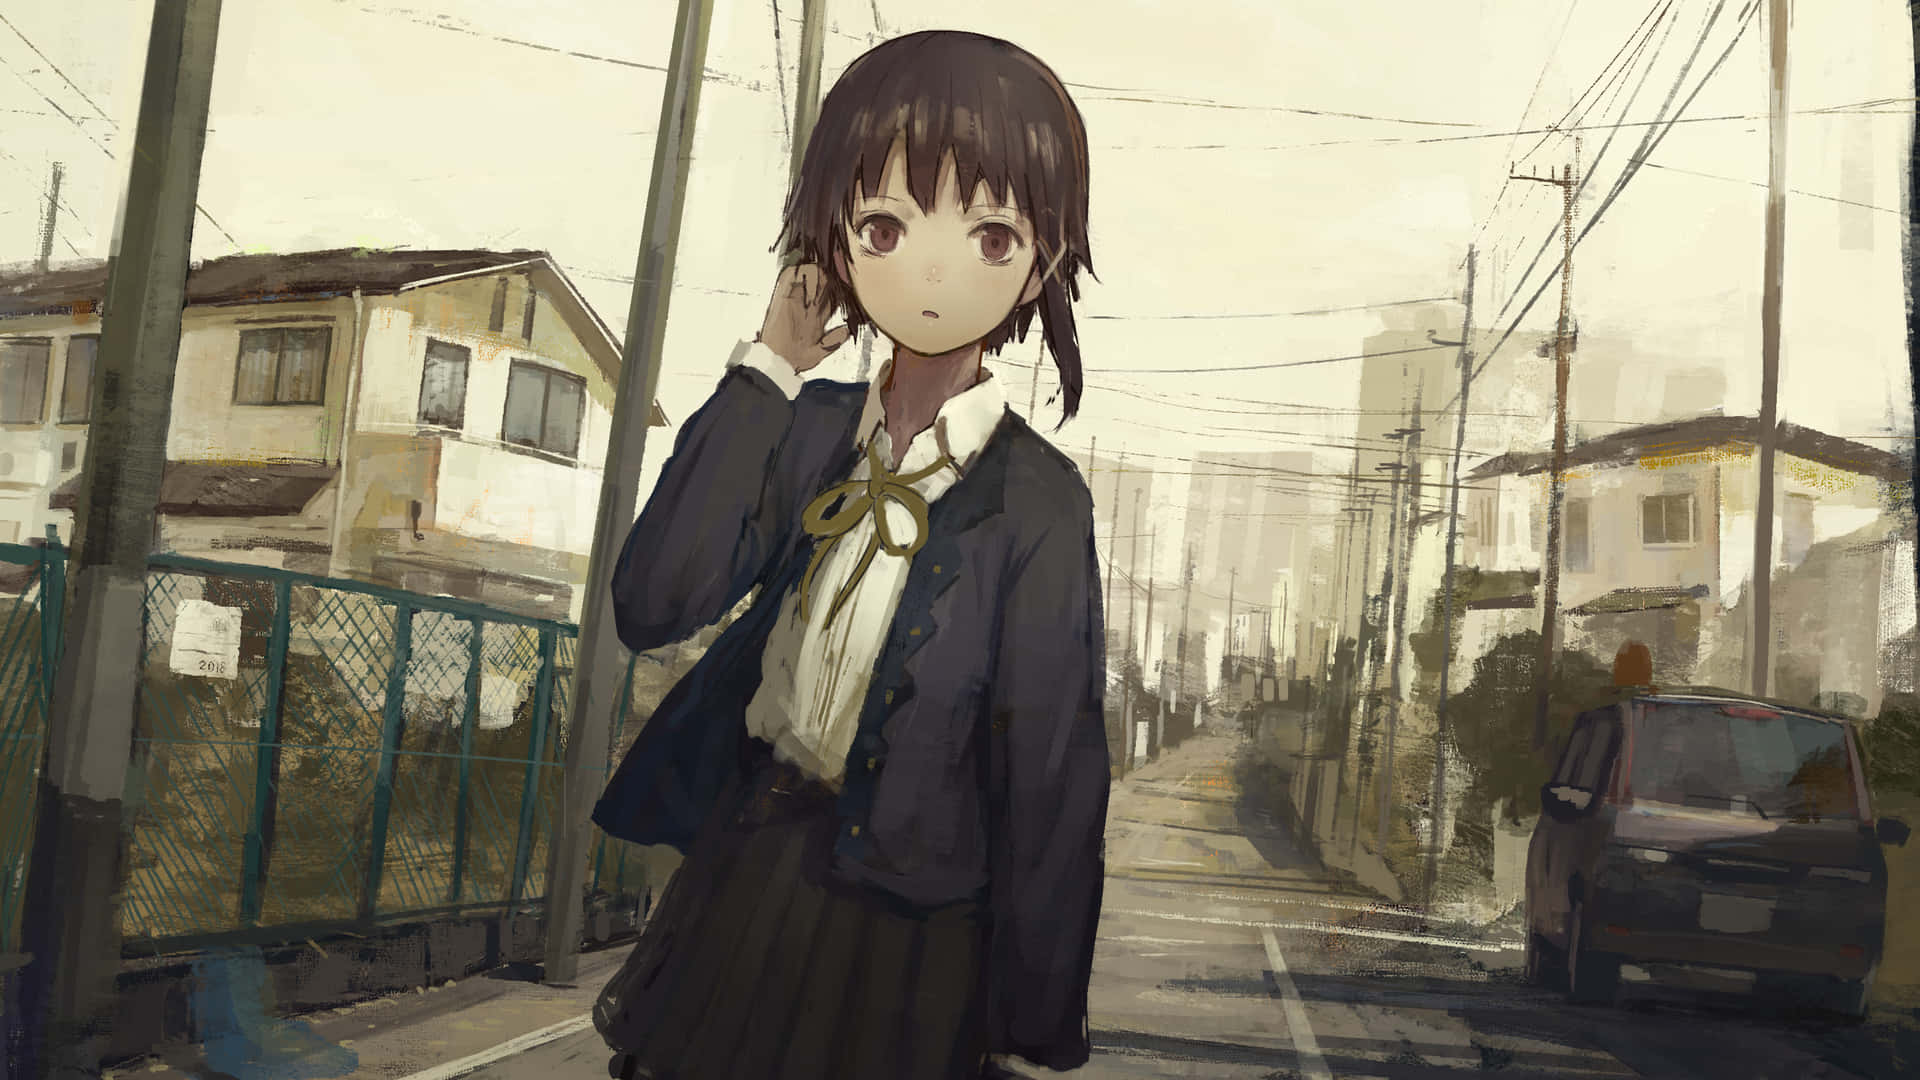 Serial Experiments Lain - “questioning Reality” Background